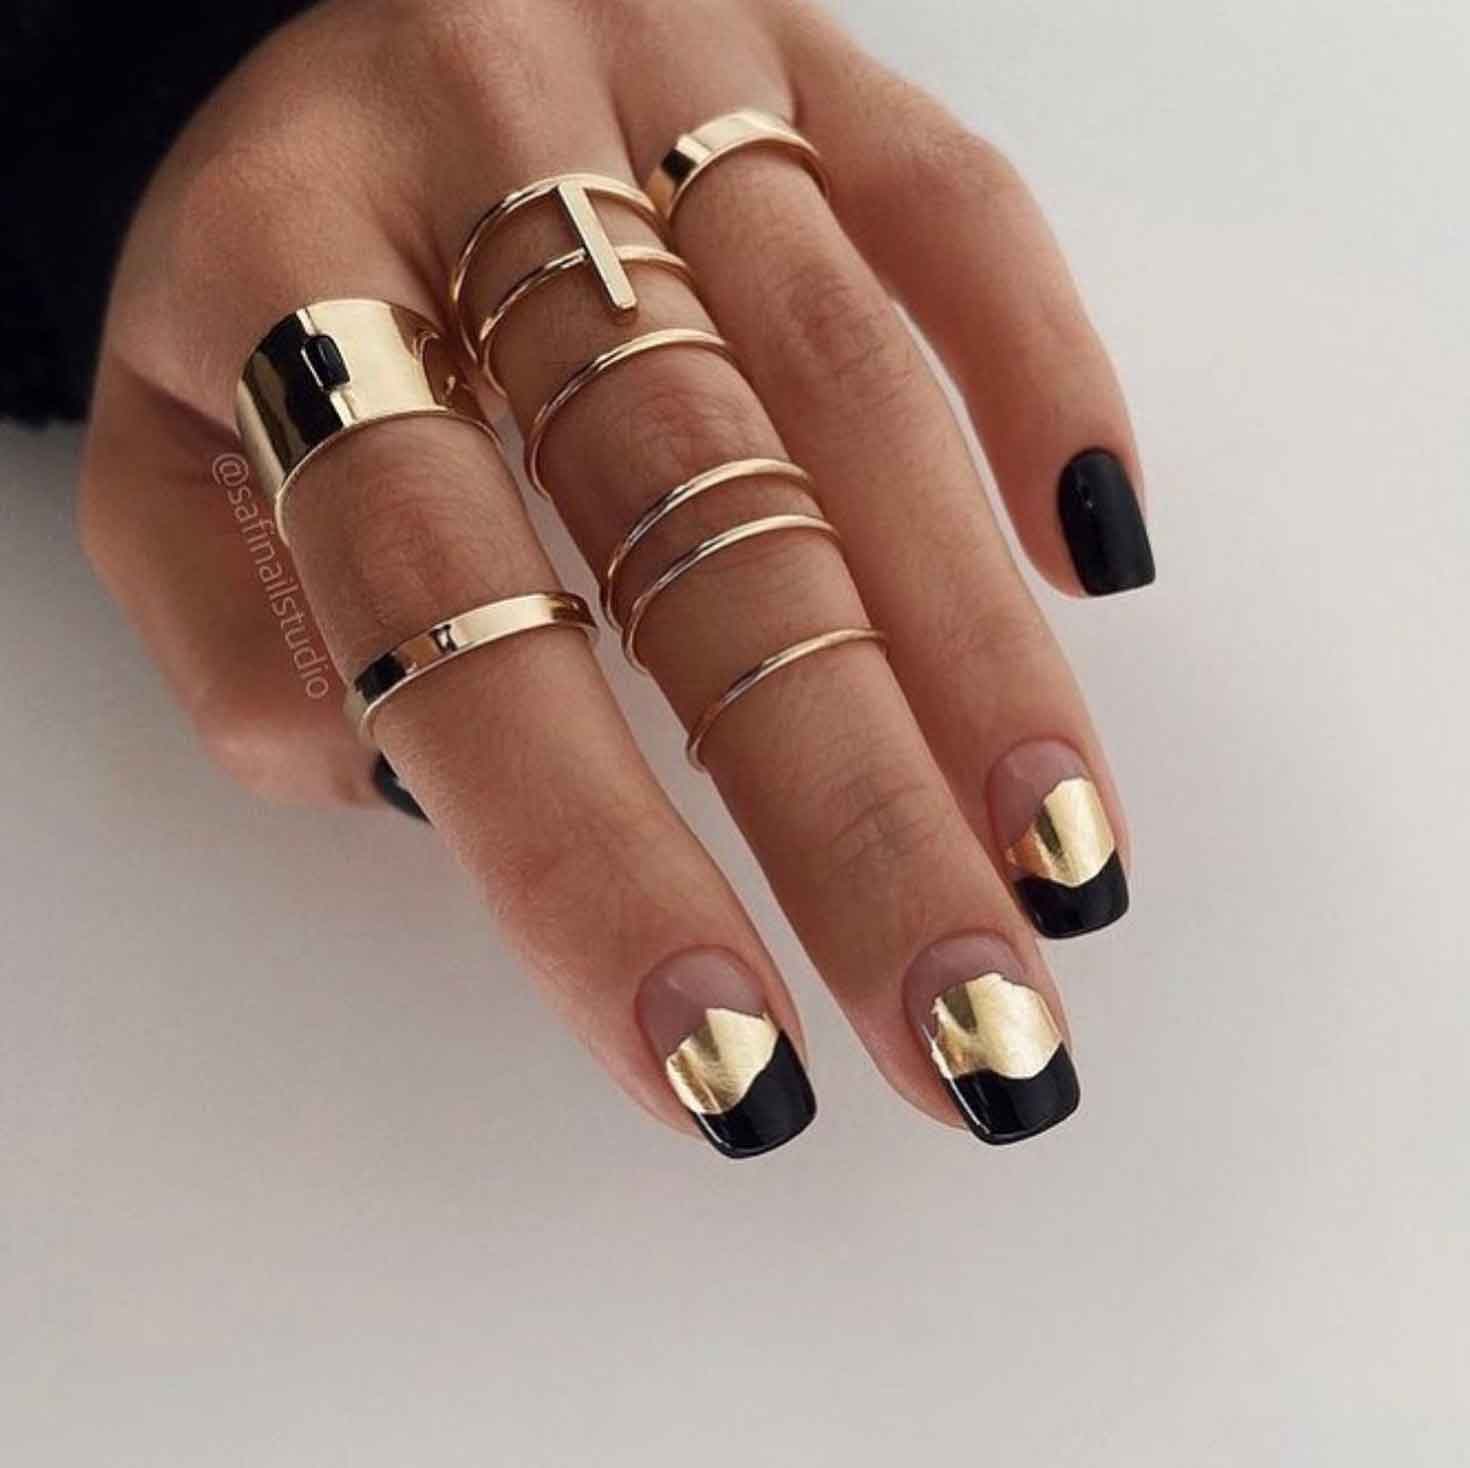 Sophisticated Black Nails Ideas to Inspire a Chic Aesthetic Manicure Mood Guide